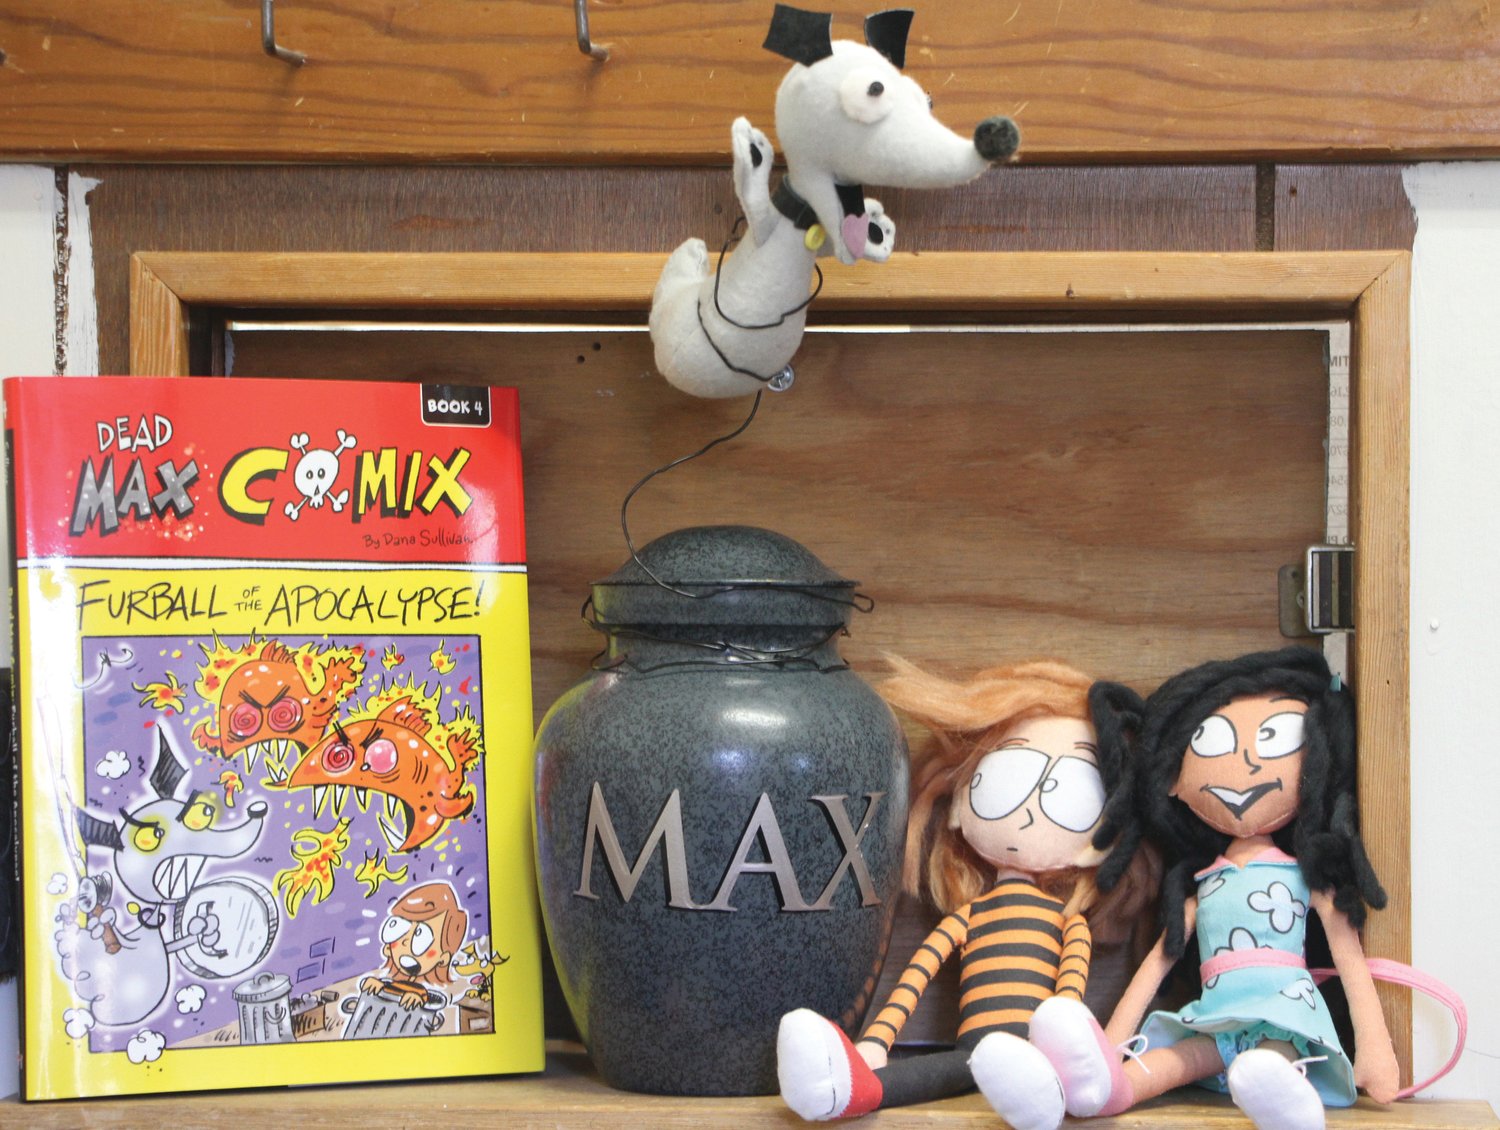 The real Max’s ashes paid a visit to The Leader office along with plush dolls modeled after the main characters made by author and illustrator Leanne Hatch.